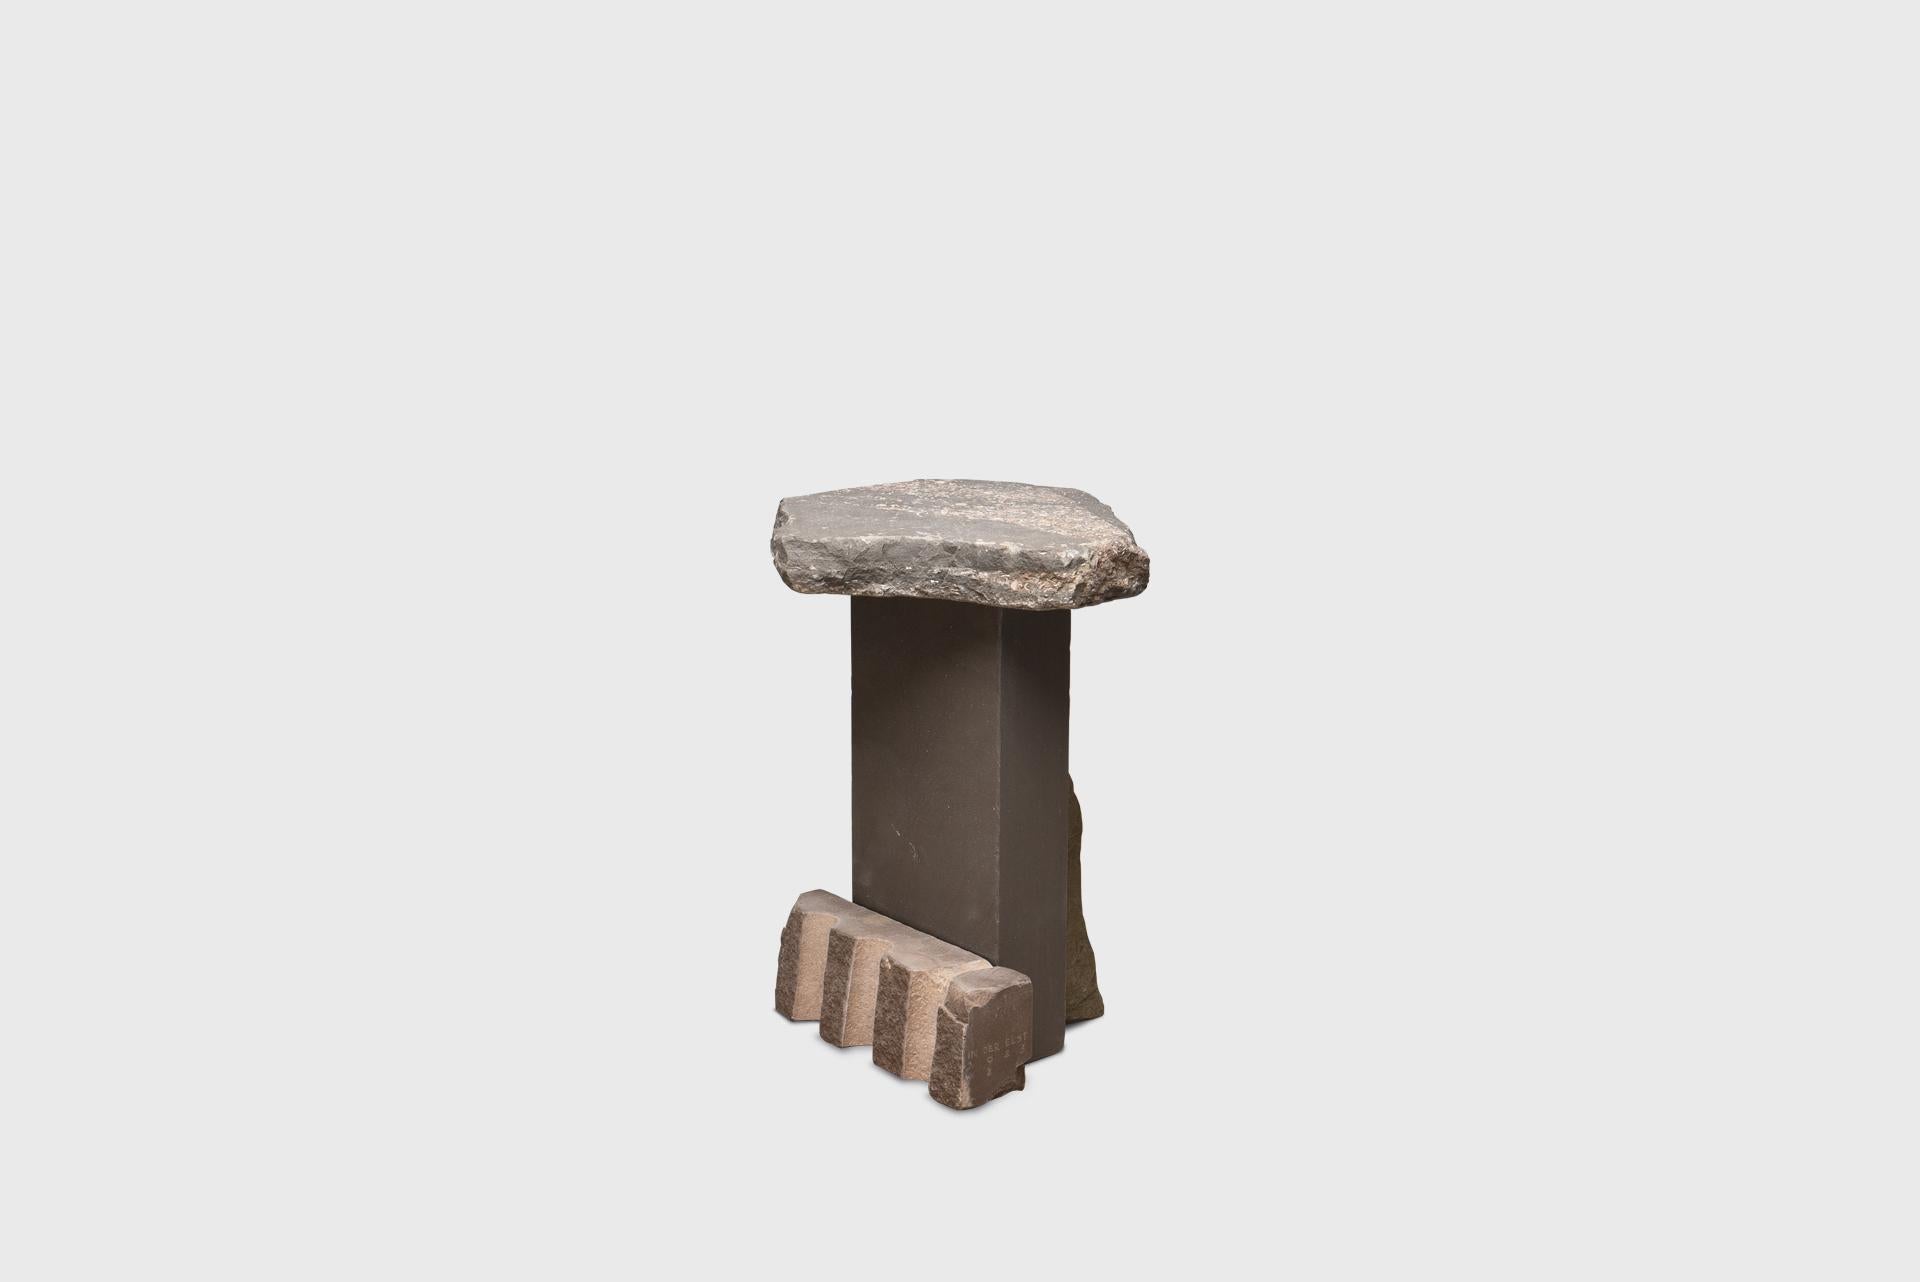 Contemporary Natural Side Table 2, Graywacke Offcut Stone, Carsten in Der Elst For Sale 2